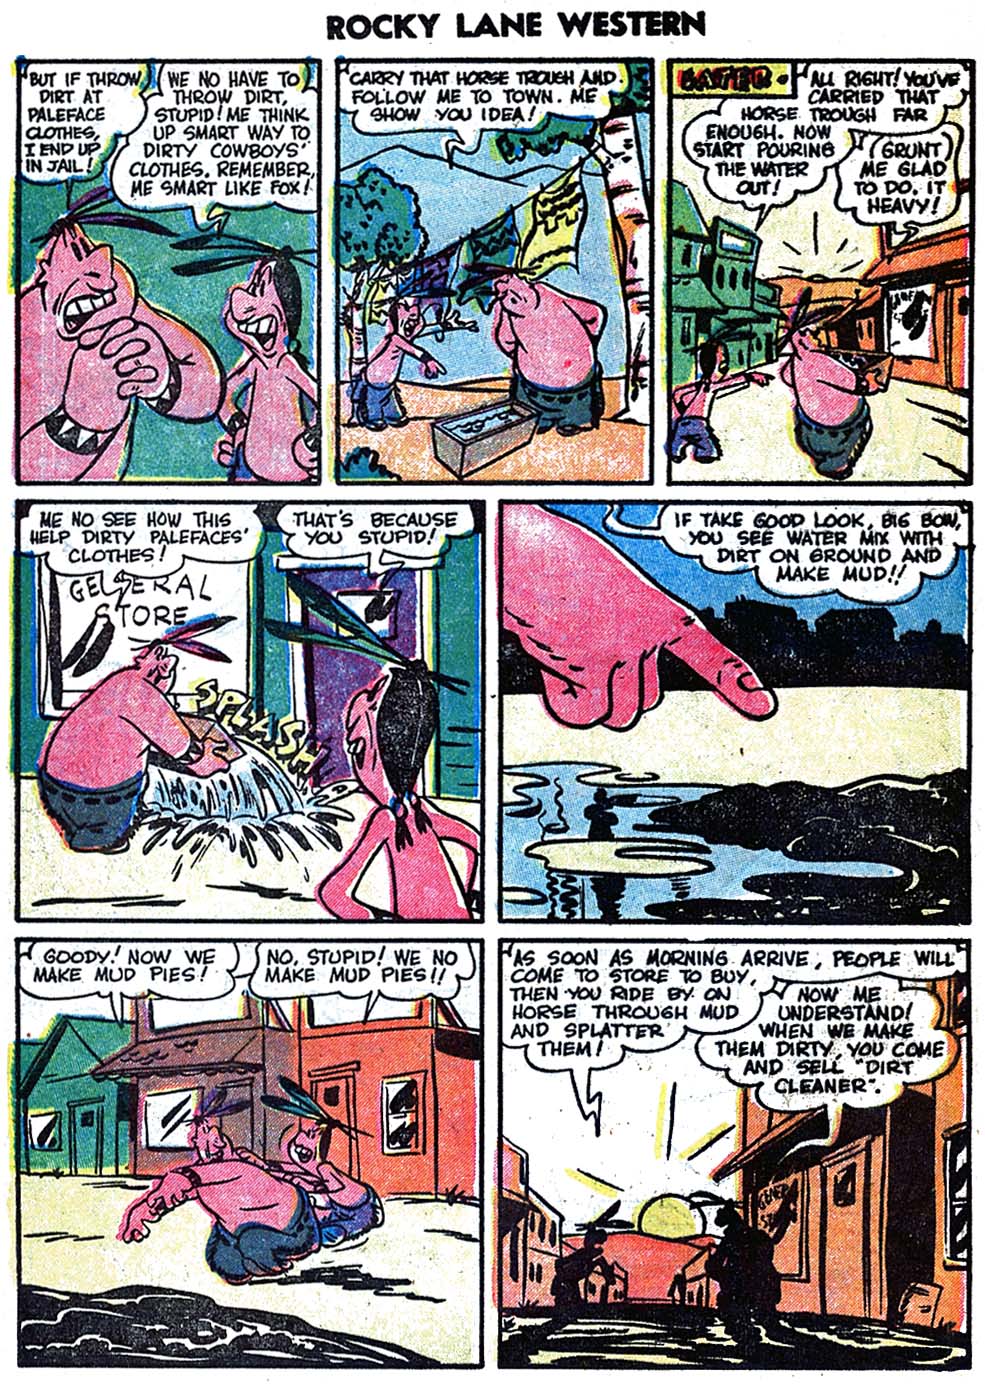 Rocky Lane Western (1954) issue 60 - Page 19